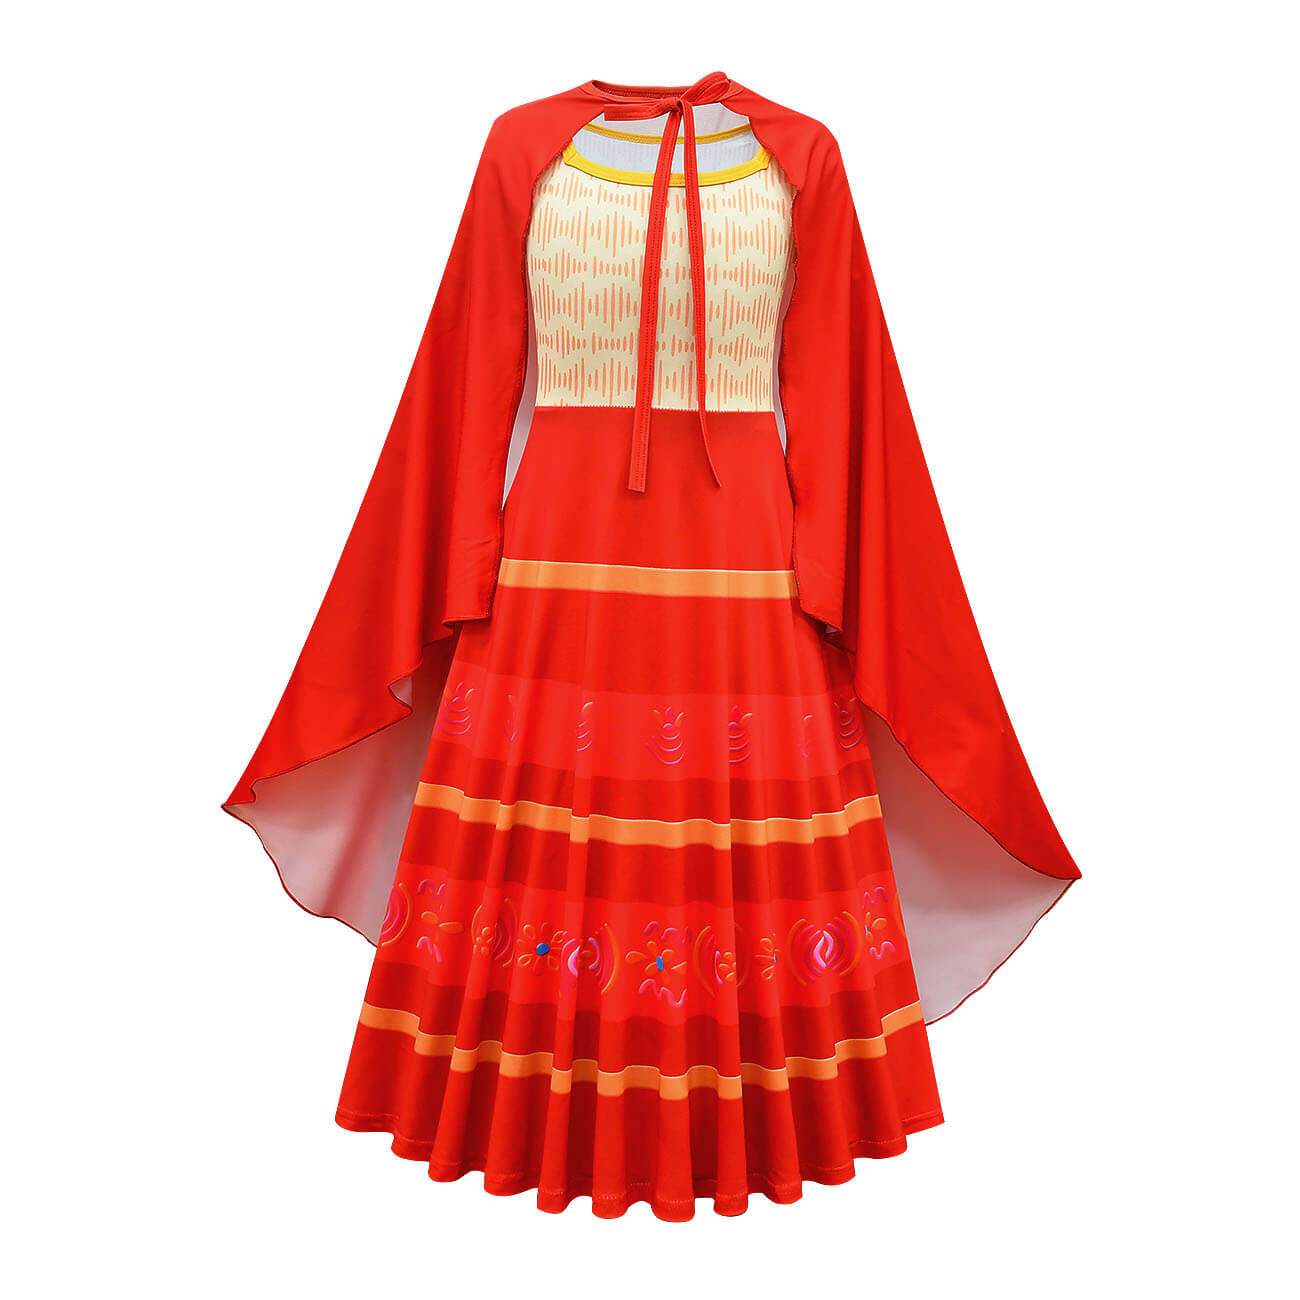 Kids Dolores Dress Magic Family Madrigal Cosplay Costume Girls A-line Swing Princess Dress